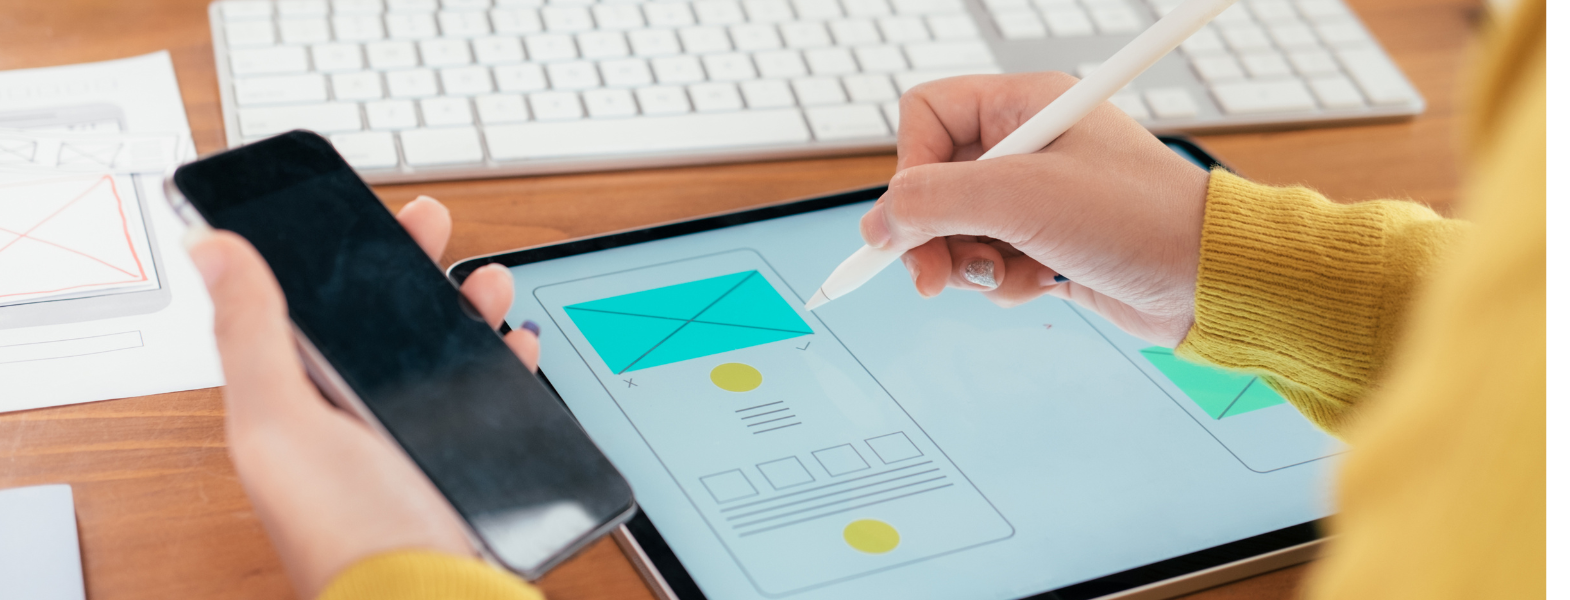 5 UX/UI Design Trends You Need To Know in 2023